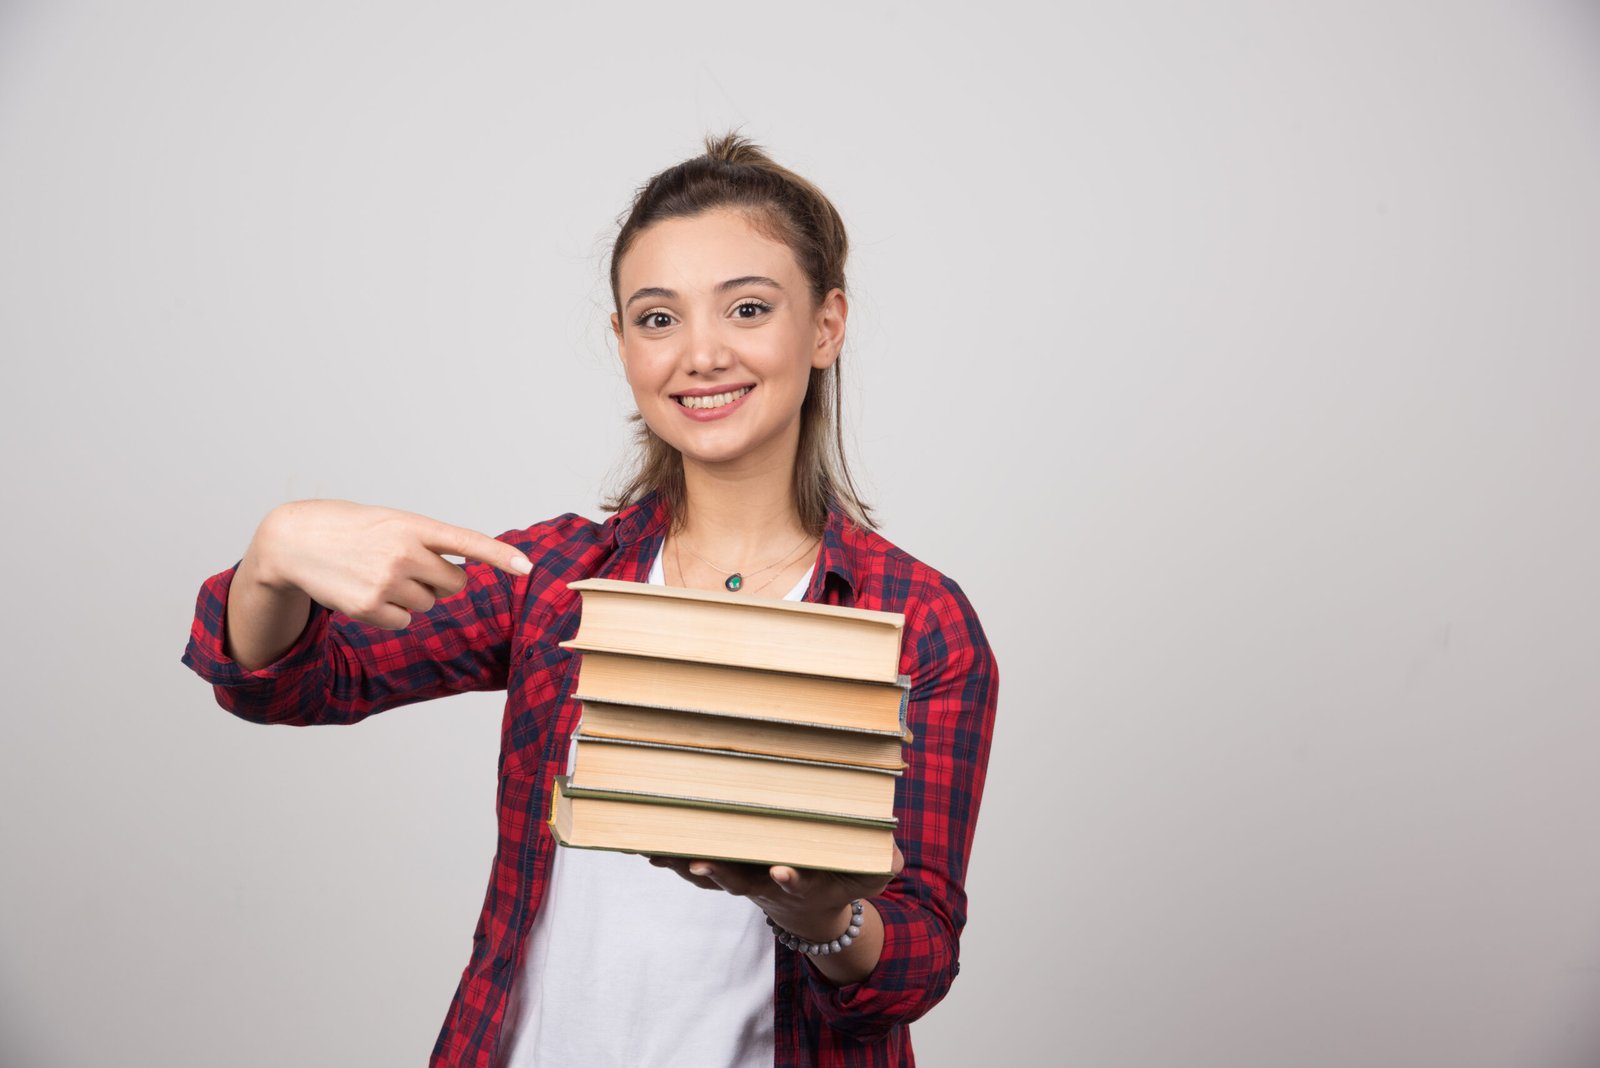 A smiling woman pointing at a stack of books